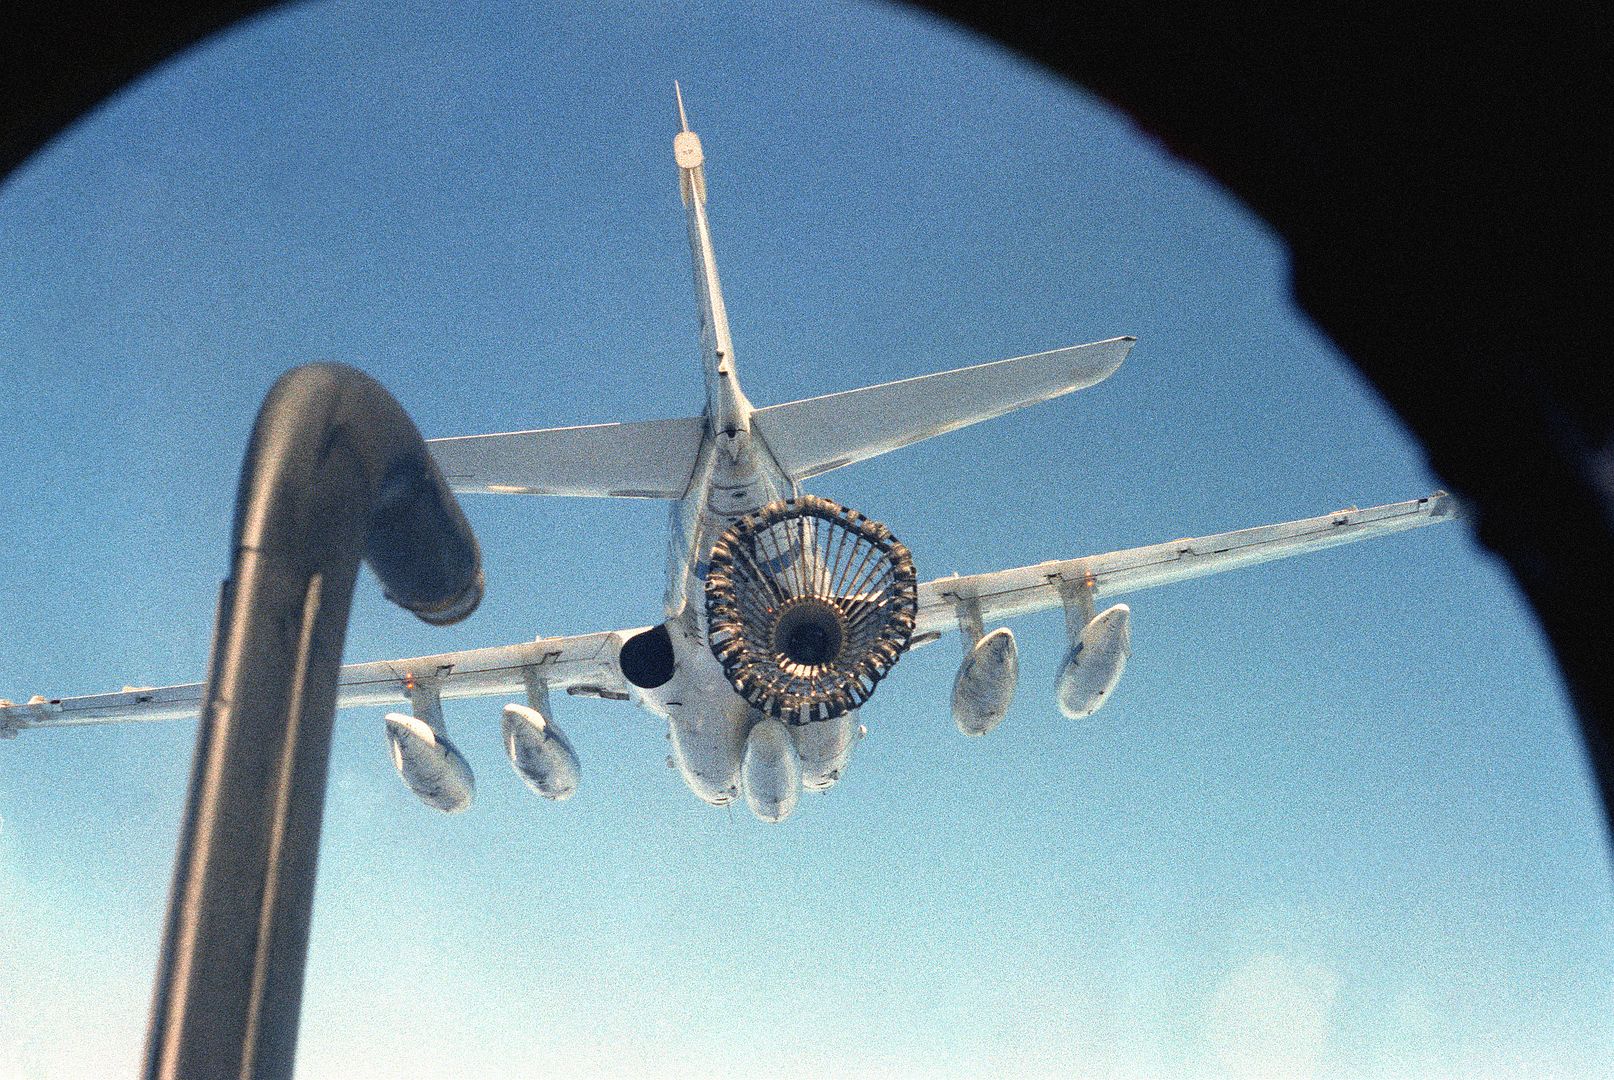 A View Of The Refueling Probe As Seen From The Cockpit Of An A 6 Intruder As The Aircraft Approaches The Refueling Drogue Of A KA 6D Intruder Tanker Aircraft